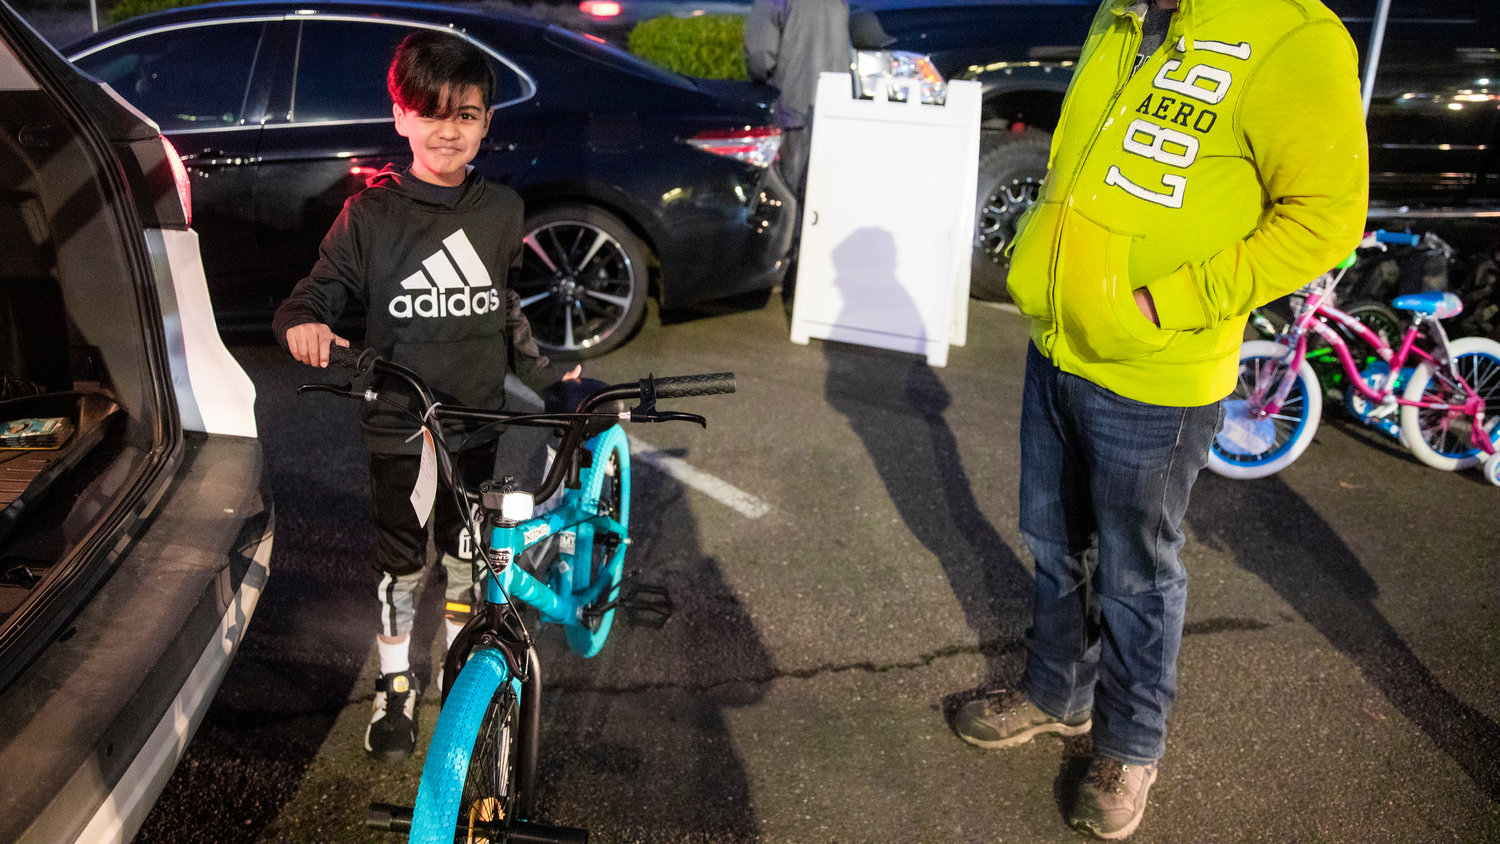 Emilio, 8, poses for a photo with his new bike during a “Choose Local Black Friday” giveaway hosted by the Centralia-Chehalis Chamber of Commerce Wednesday evening in the Lewis County Mall parking lot.